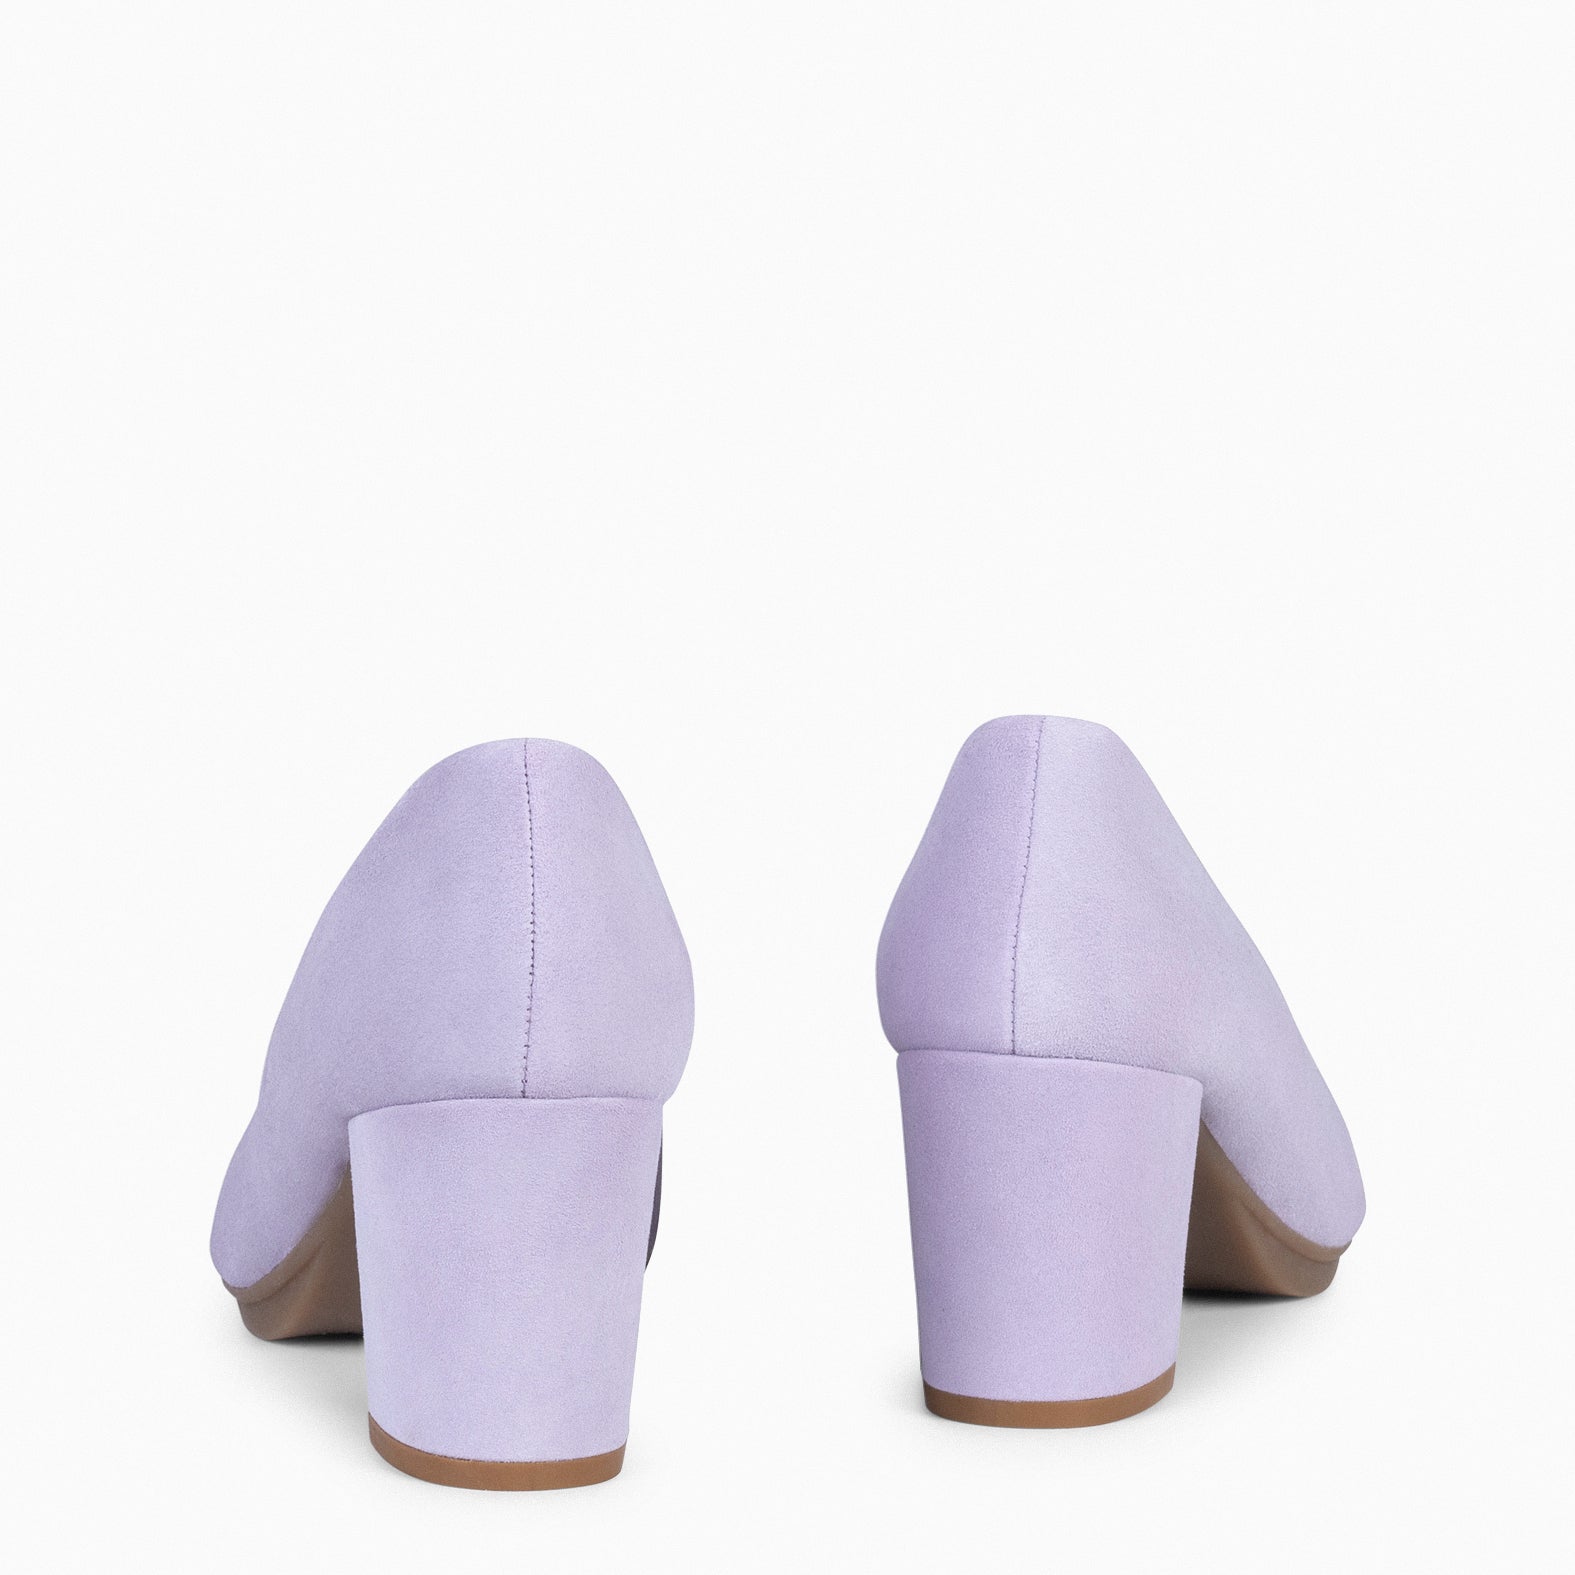 URBAN S – PURPLE Suede Mid-Heeled Shoes 